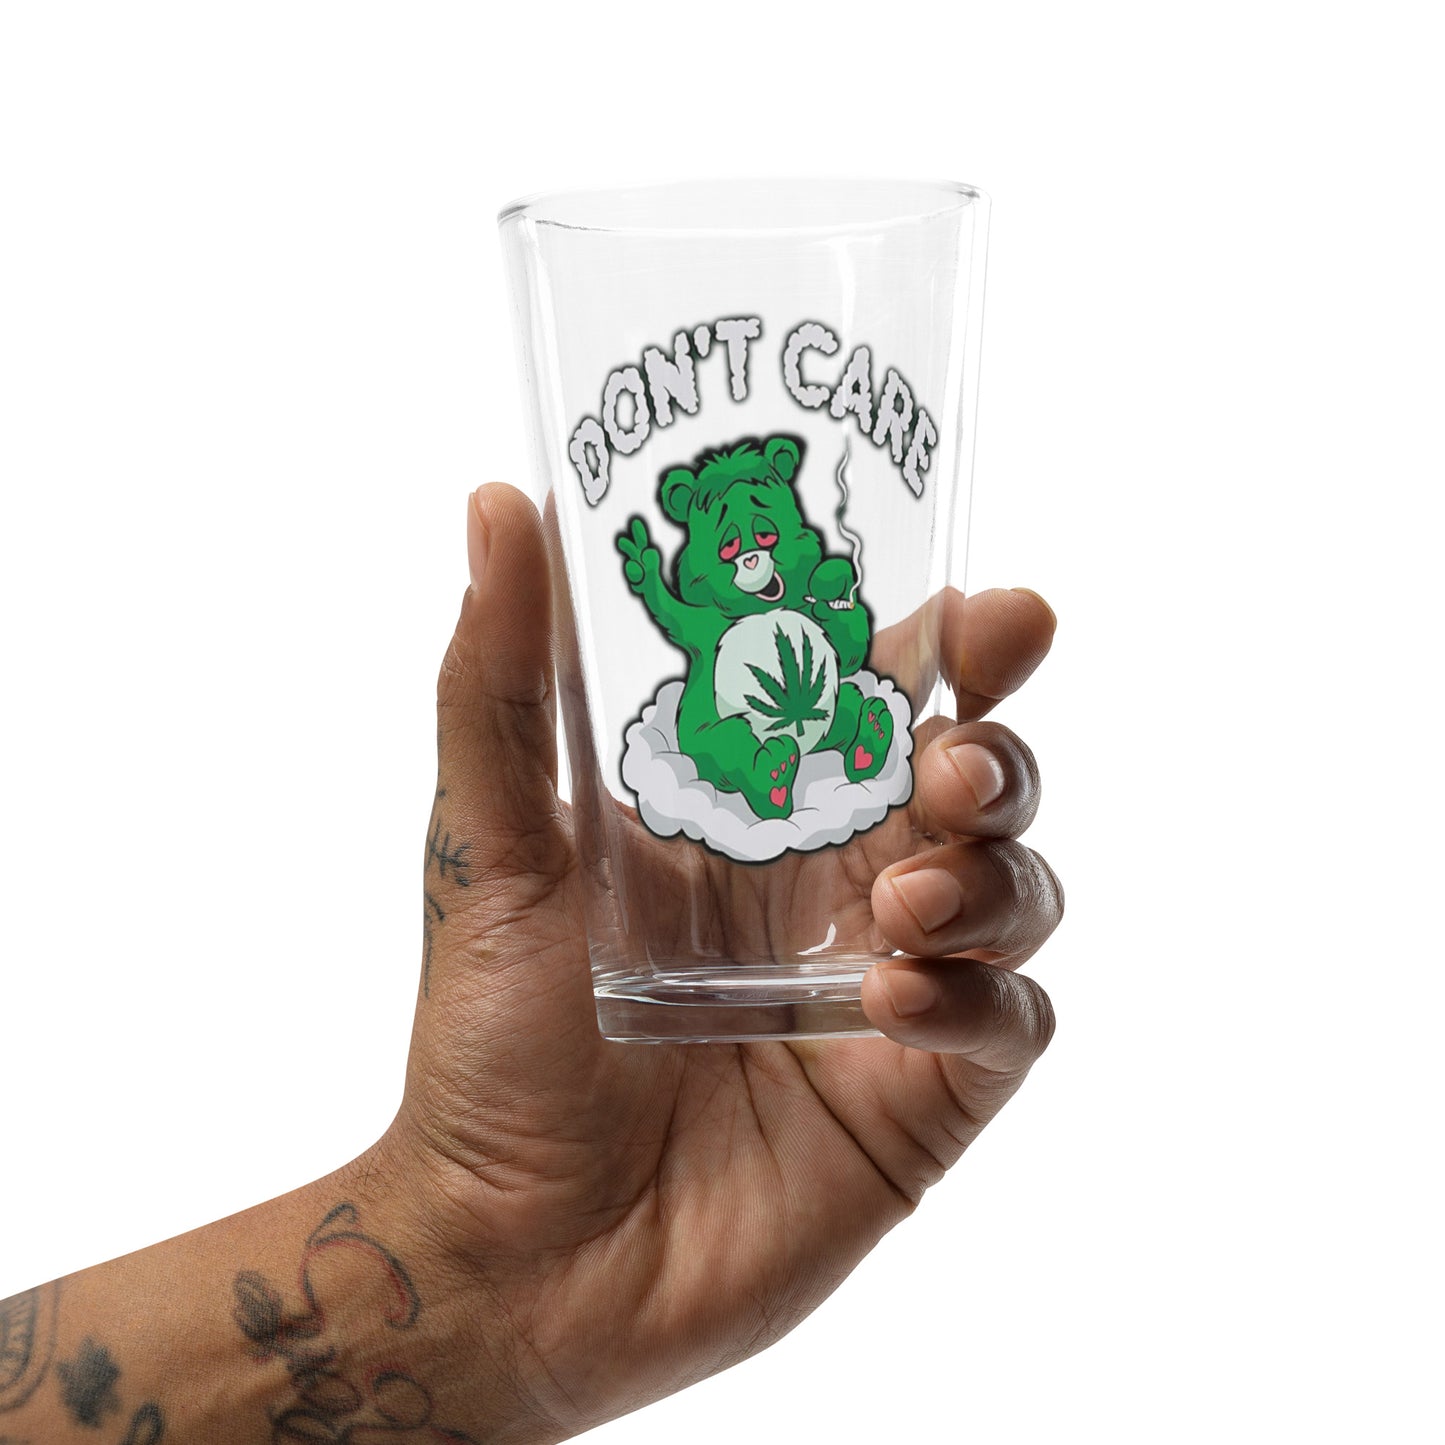 Don't Care Shaker pint glass